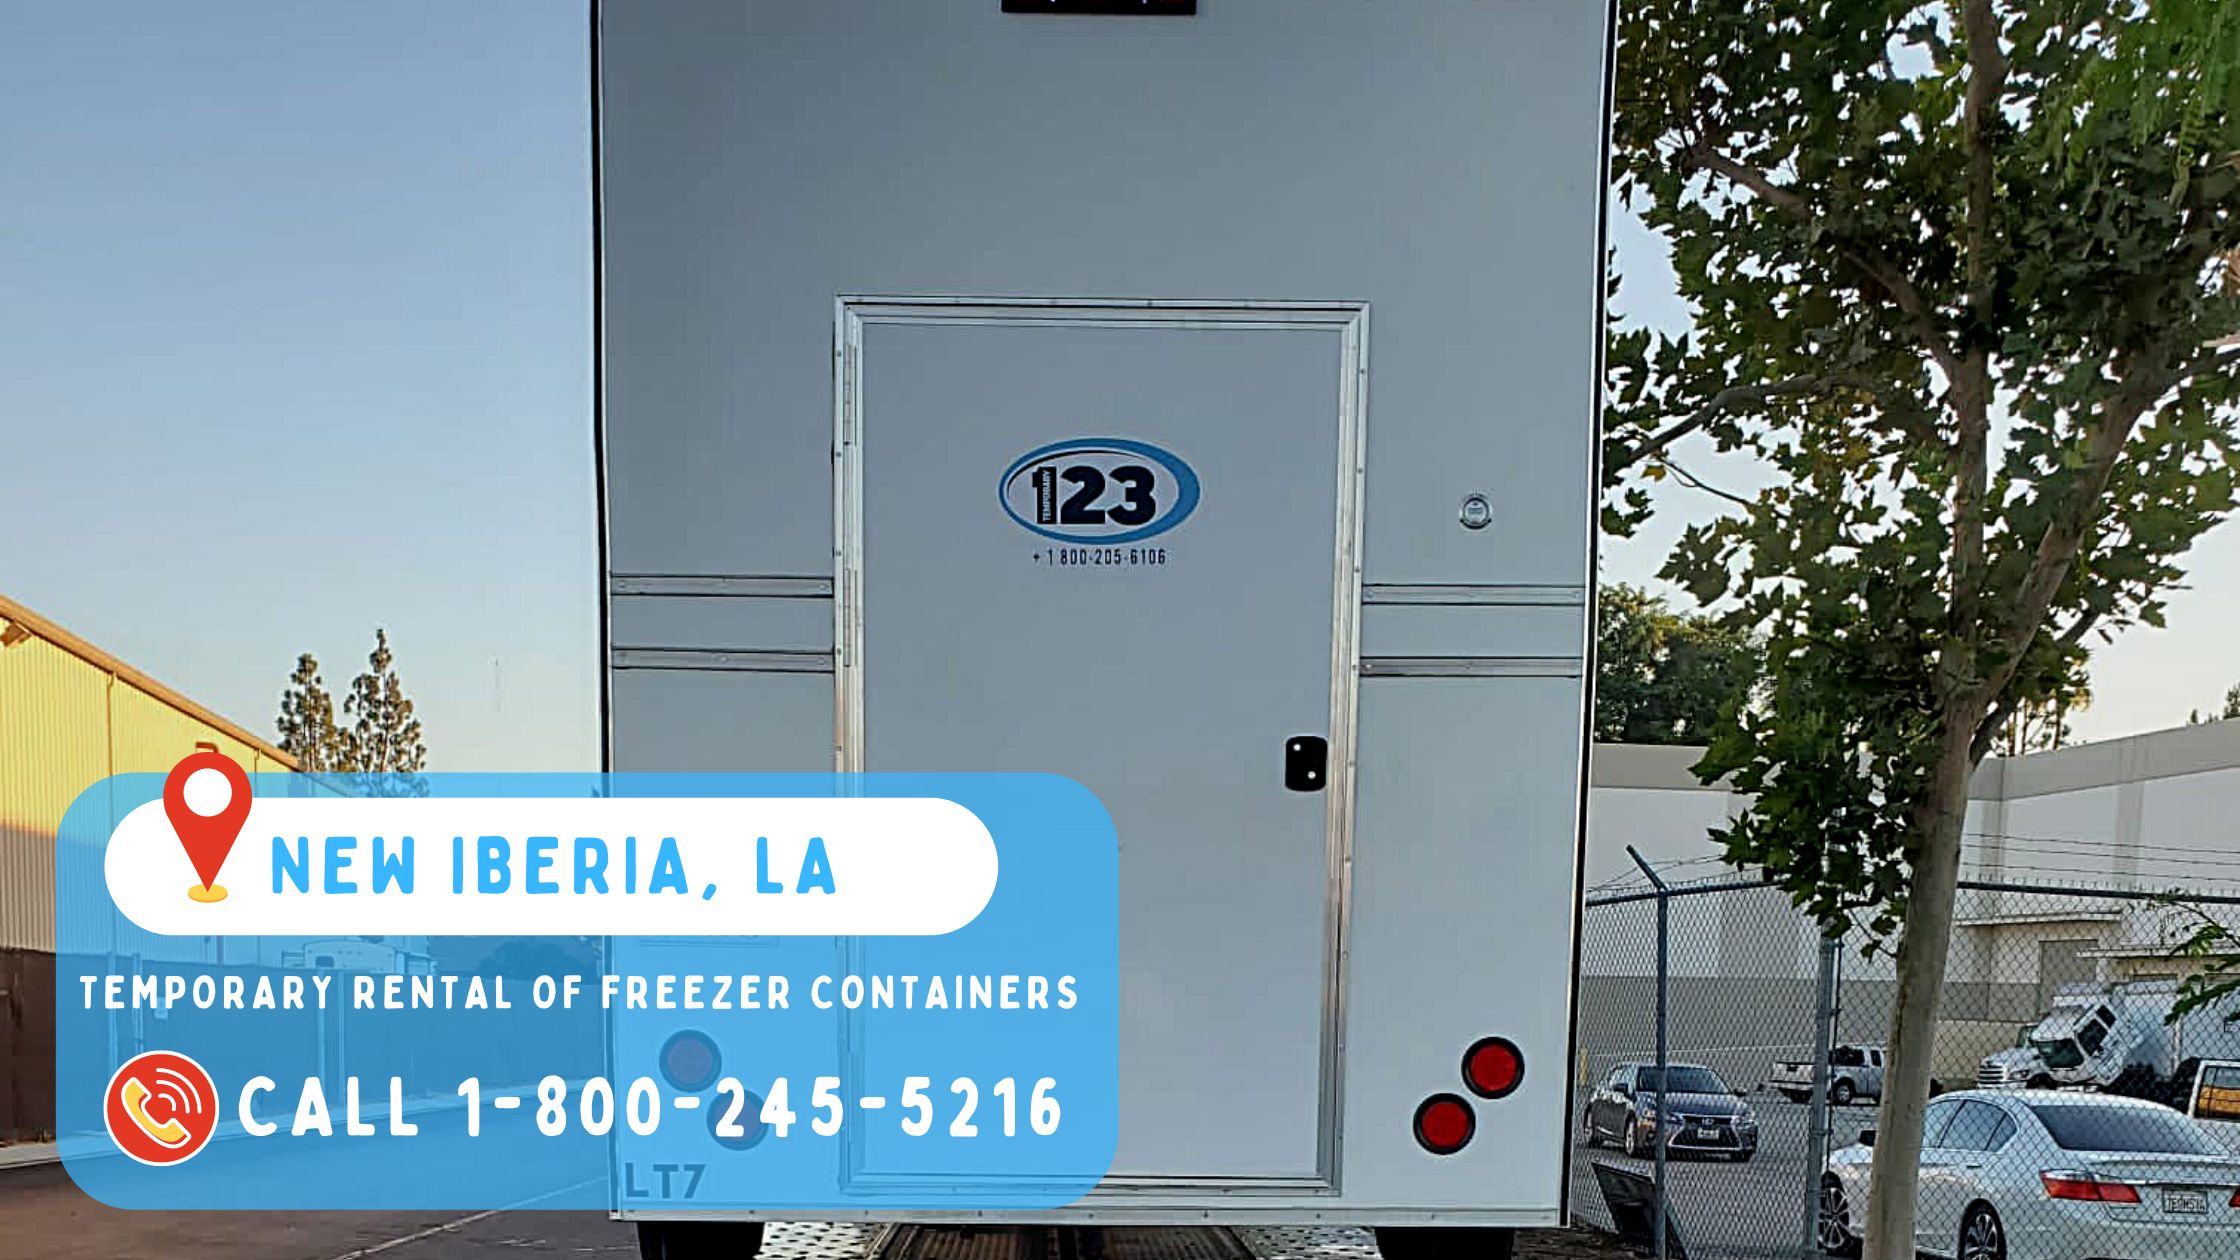 Temporary rental of freezer containers in New Iberia